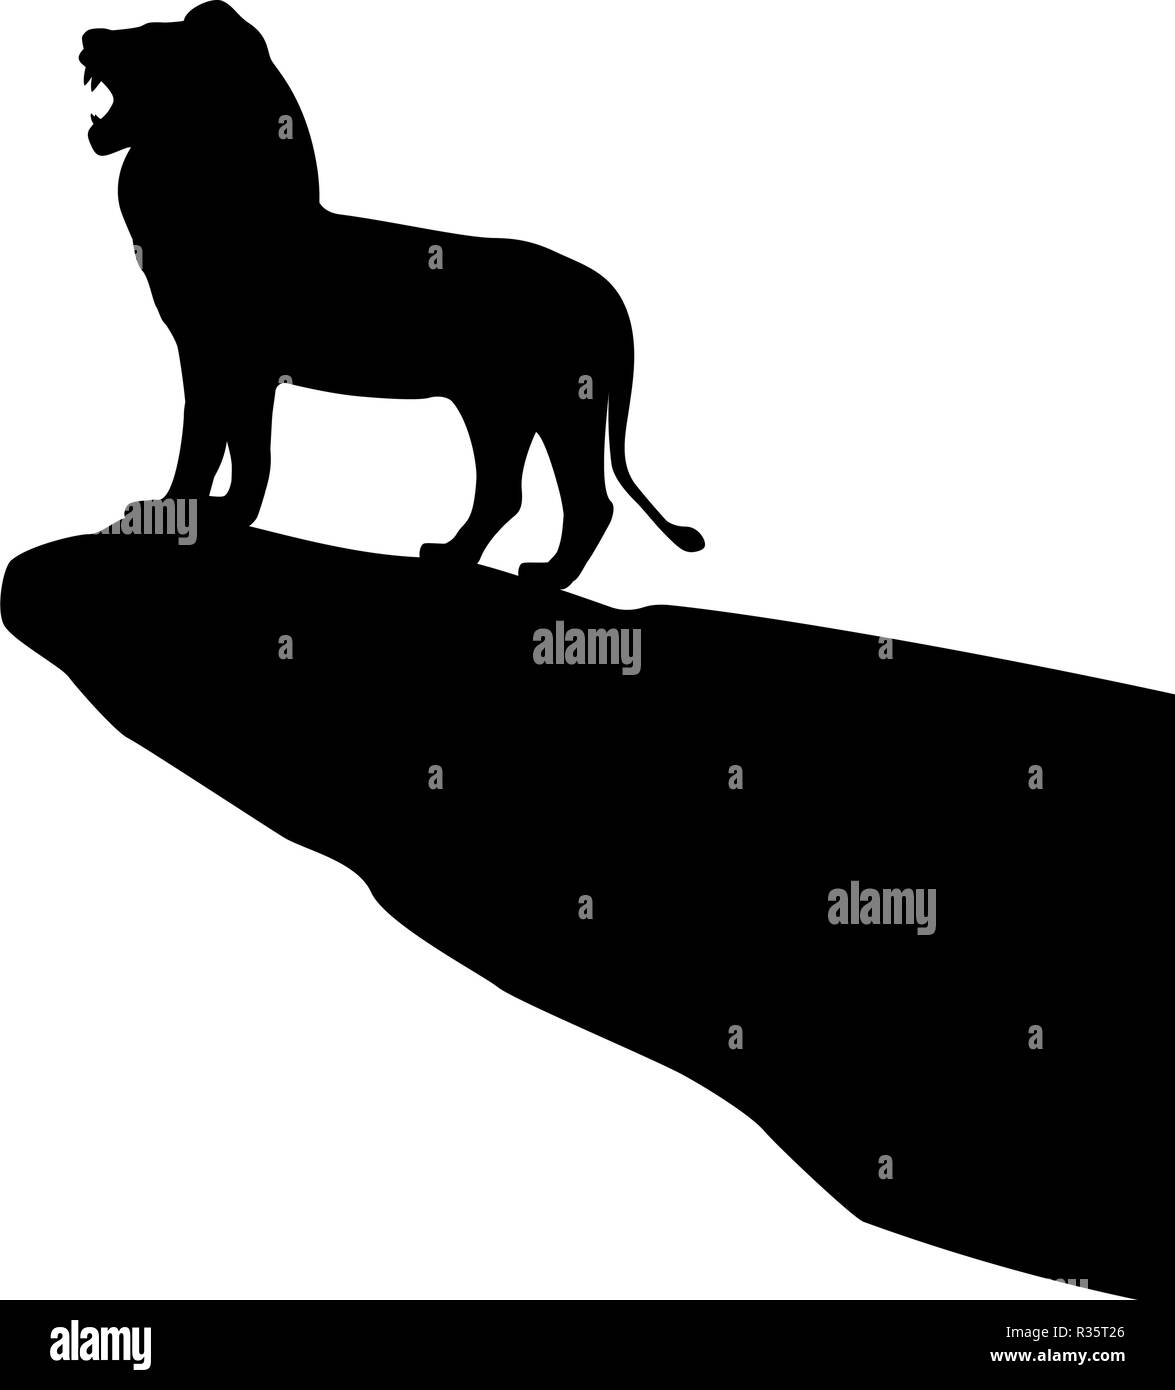 Vector illustration of isolated lion silhouette Stock Vector